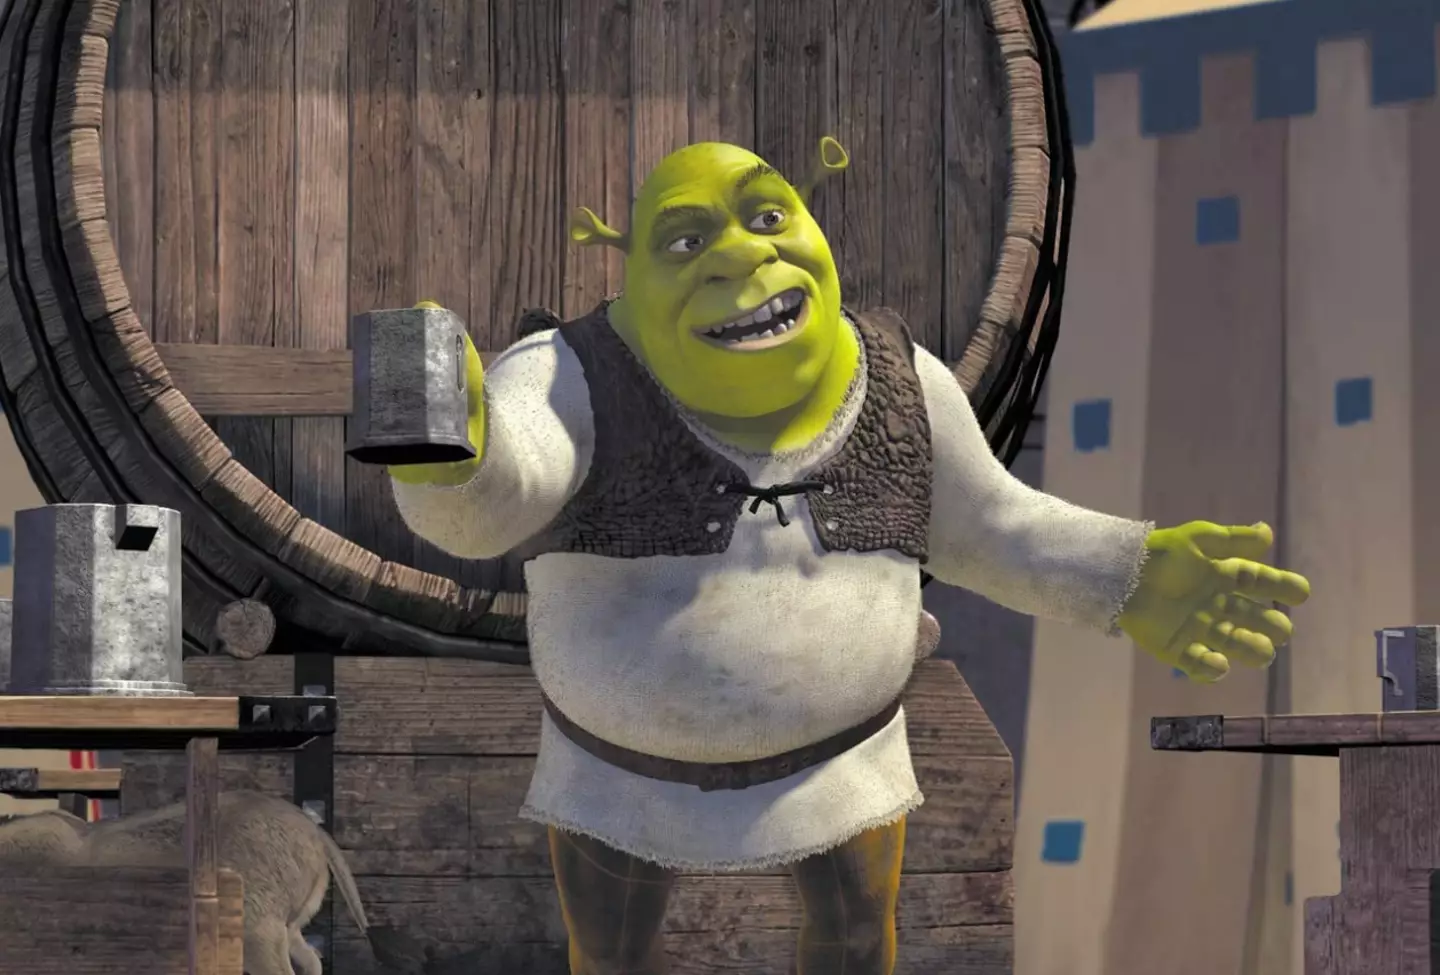 All Star is one of the many songs you'll think of when you think of Shrek.